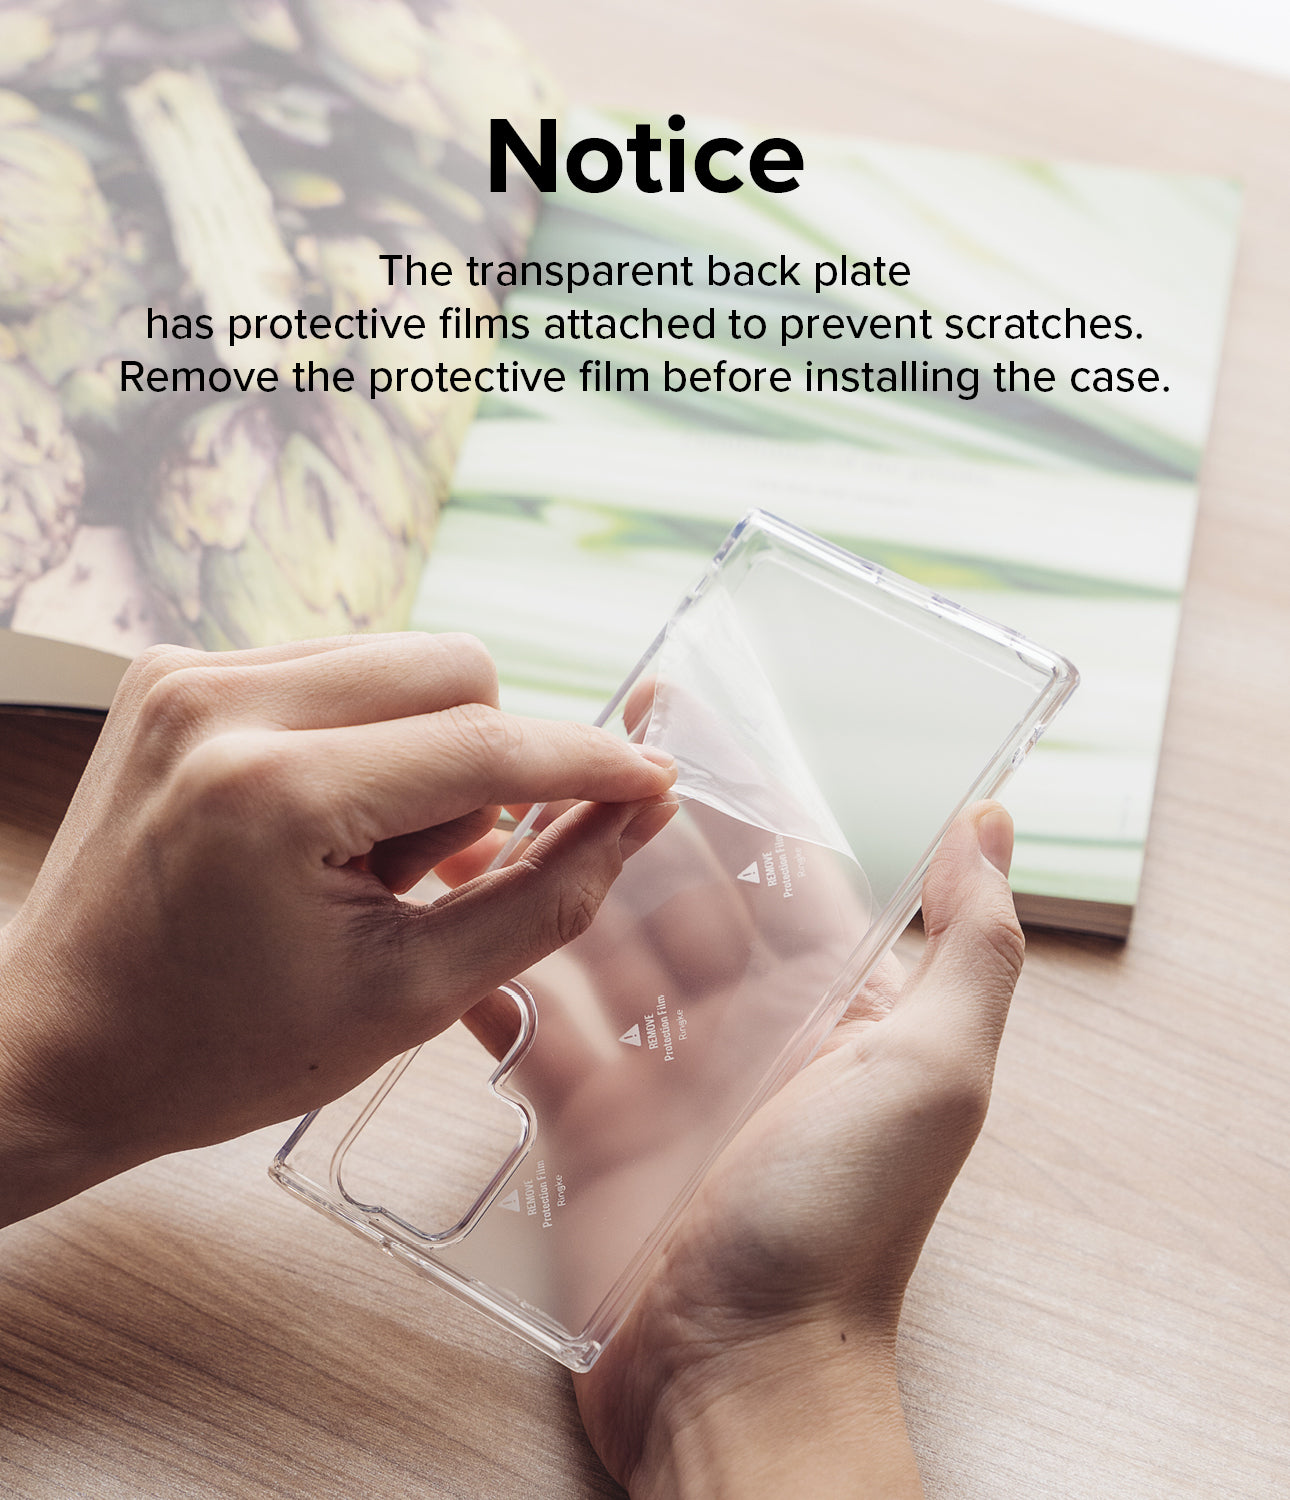 Notice l The transparent back plate has protective films attached to prevent scratches. Remove the protective film before installing the case.